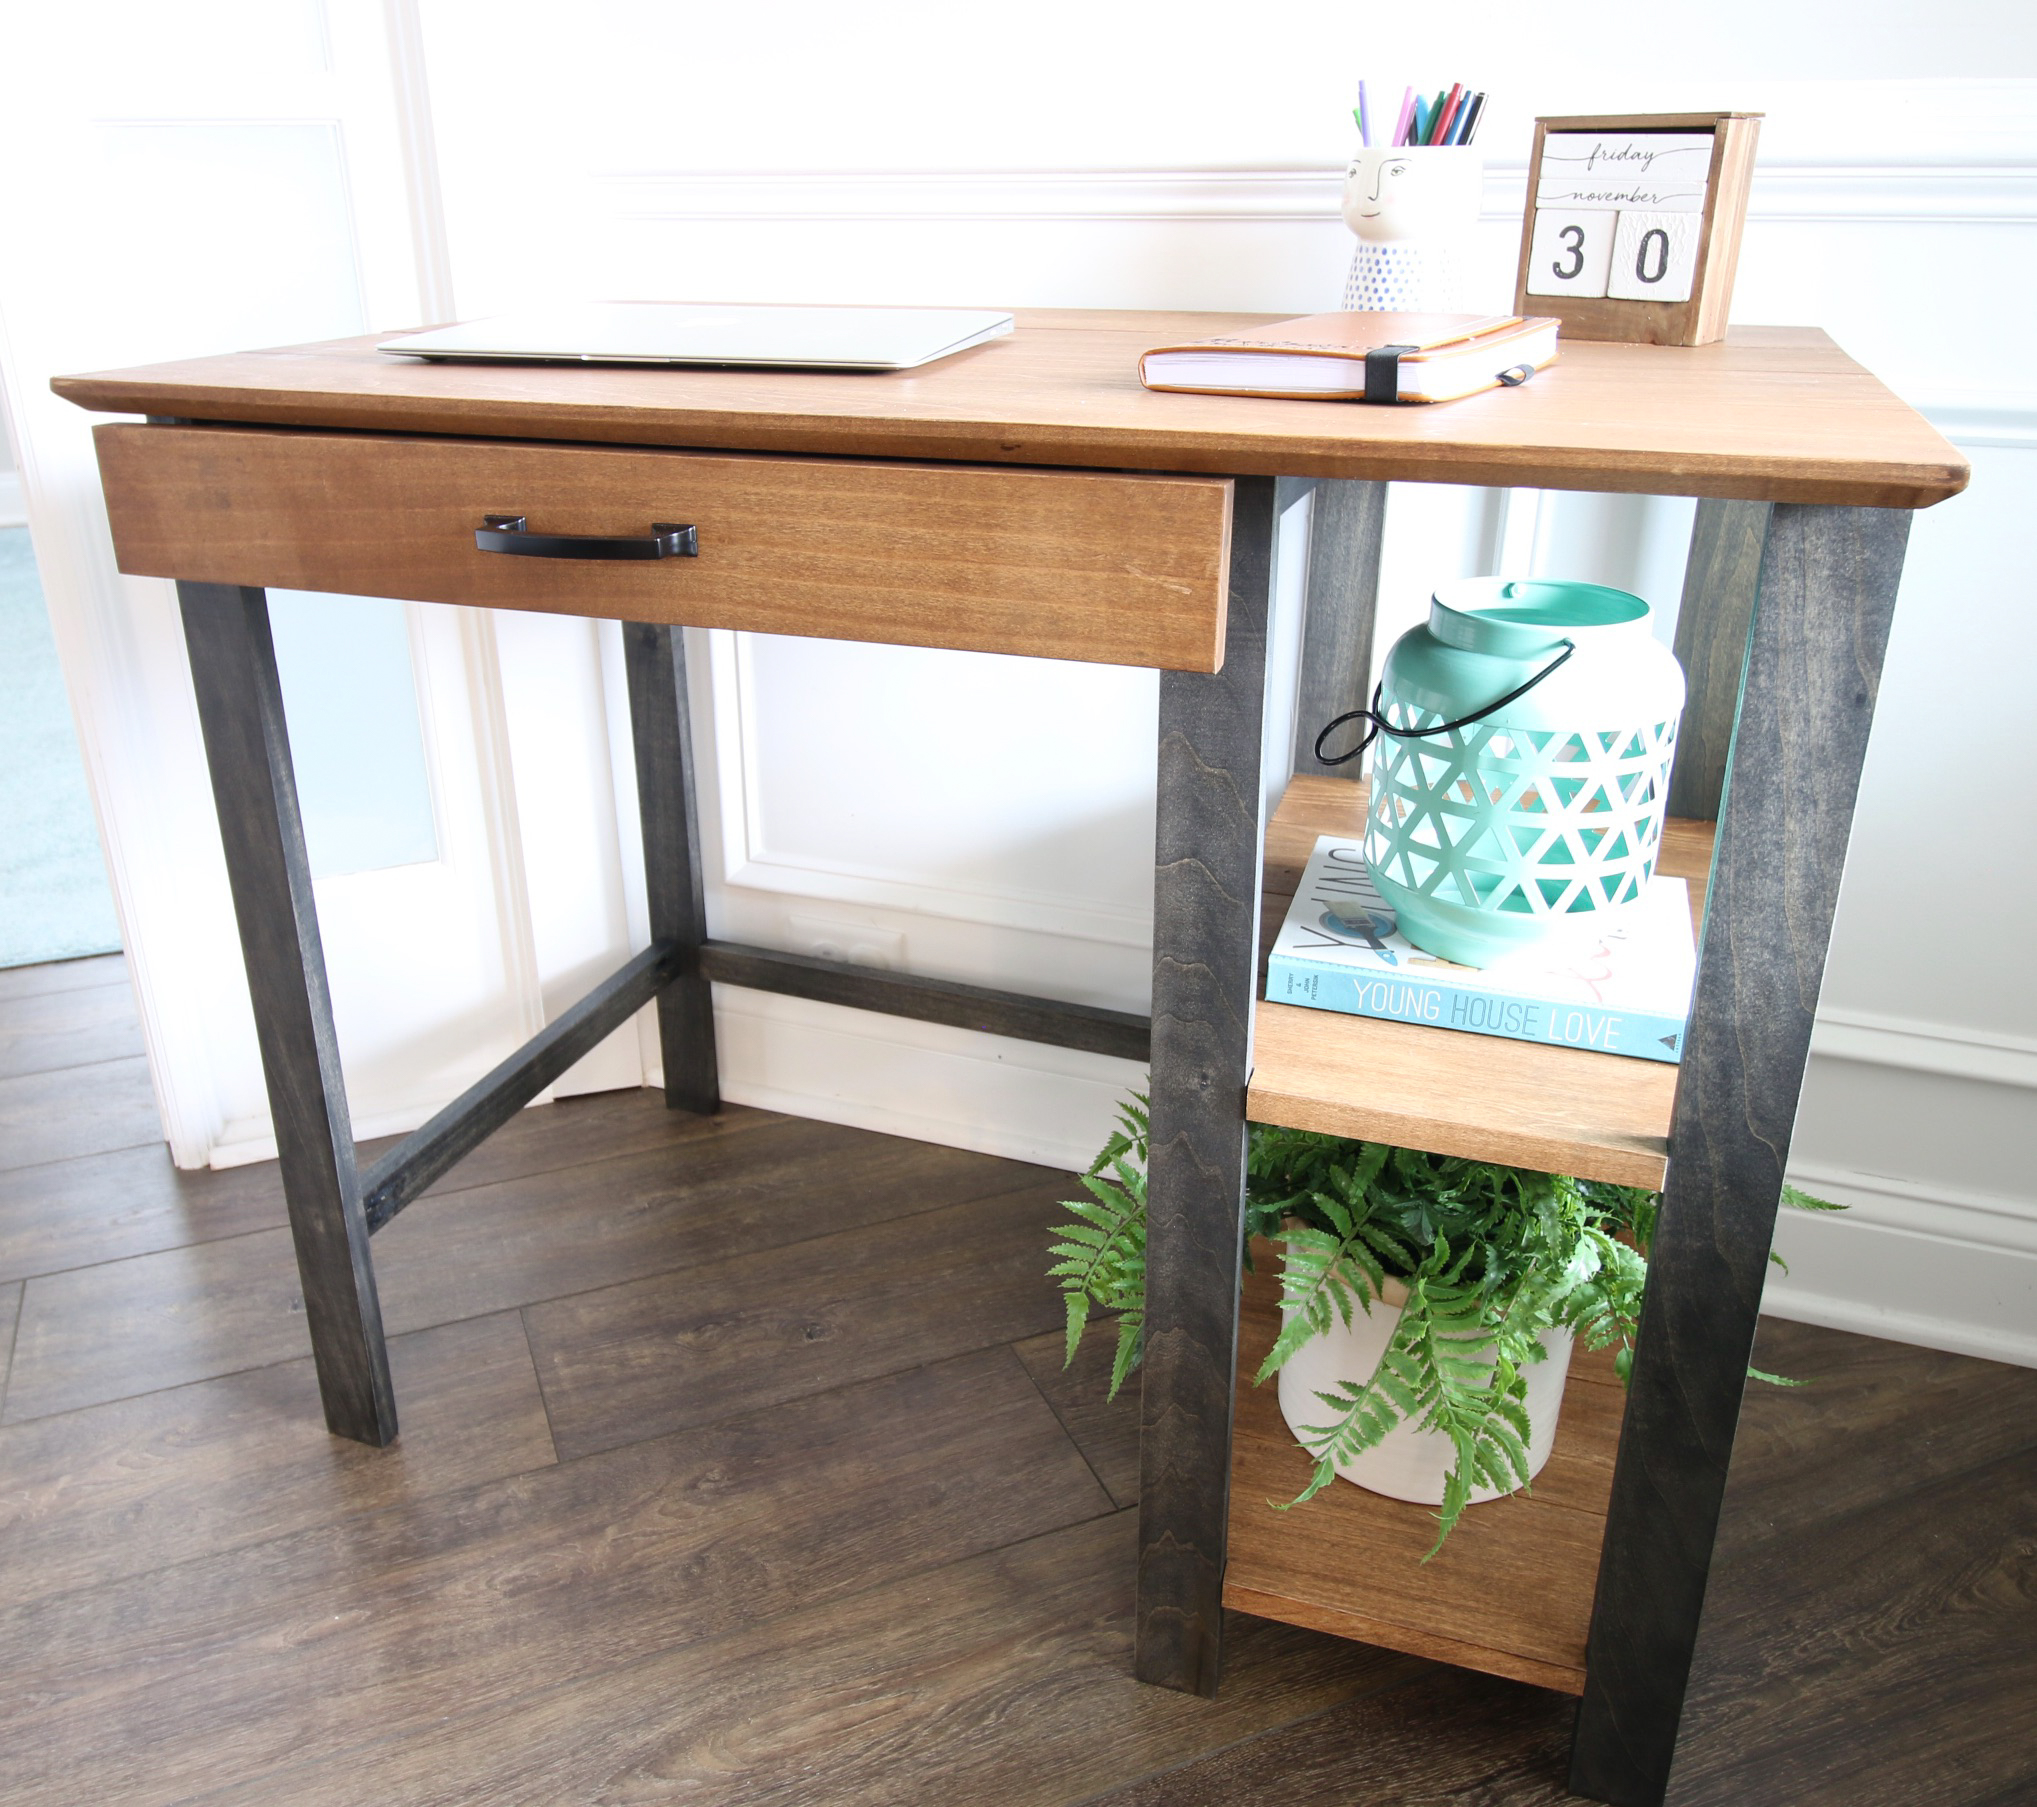 How to build a simple DIY writing desk - woodworking plans!